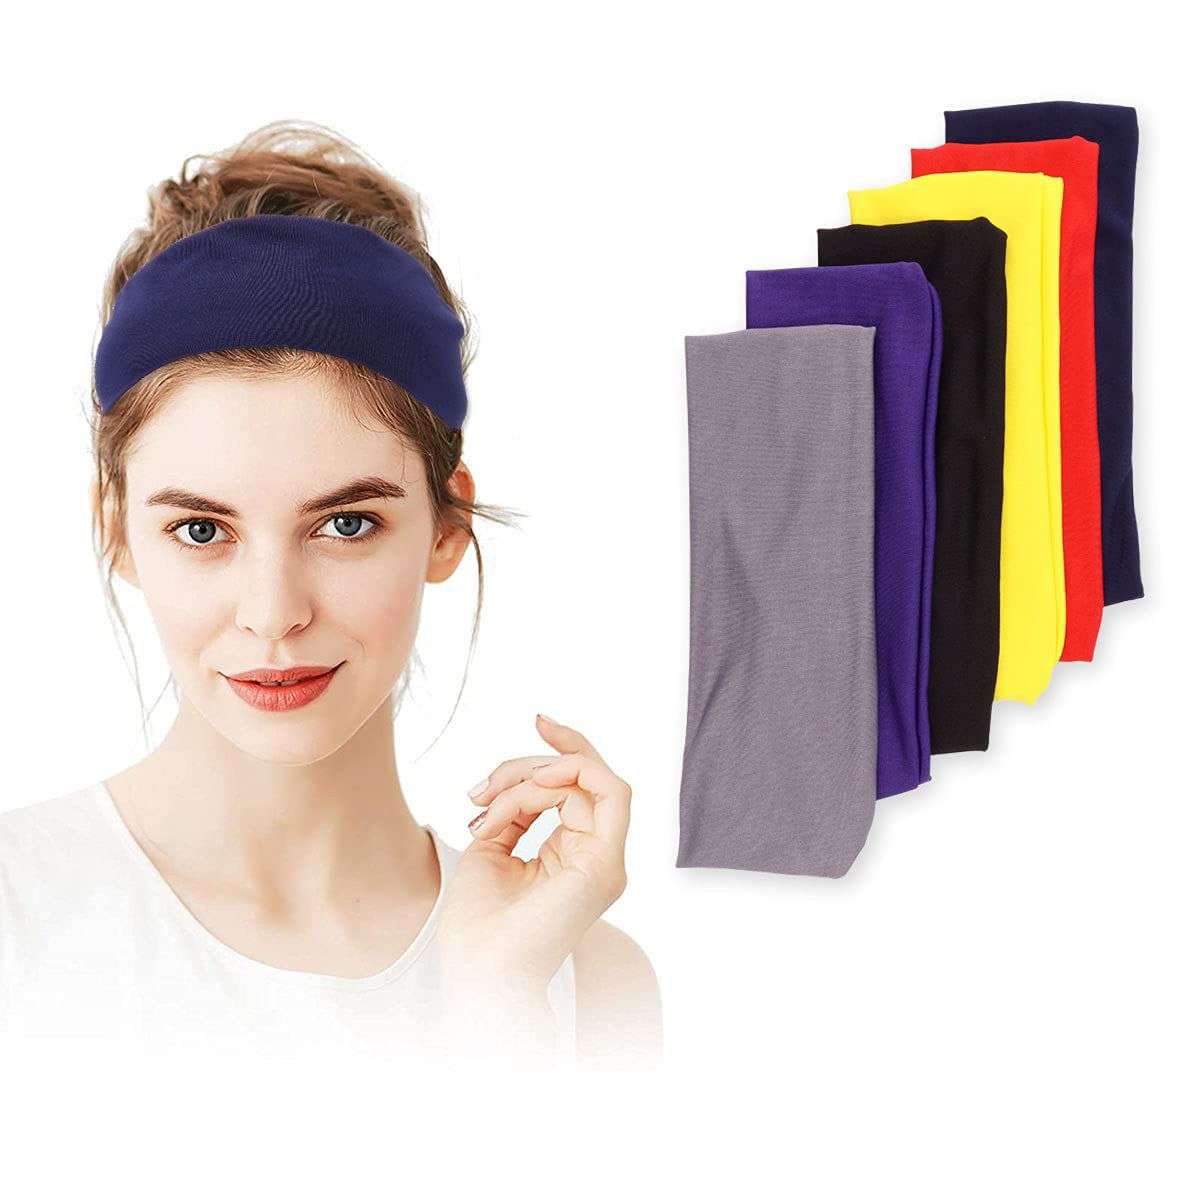 Buy Headbands & Hair Bands for Women Online at Best Price in